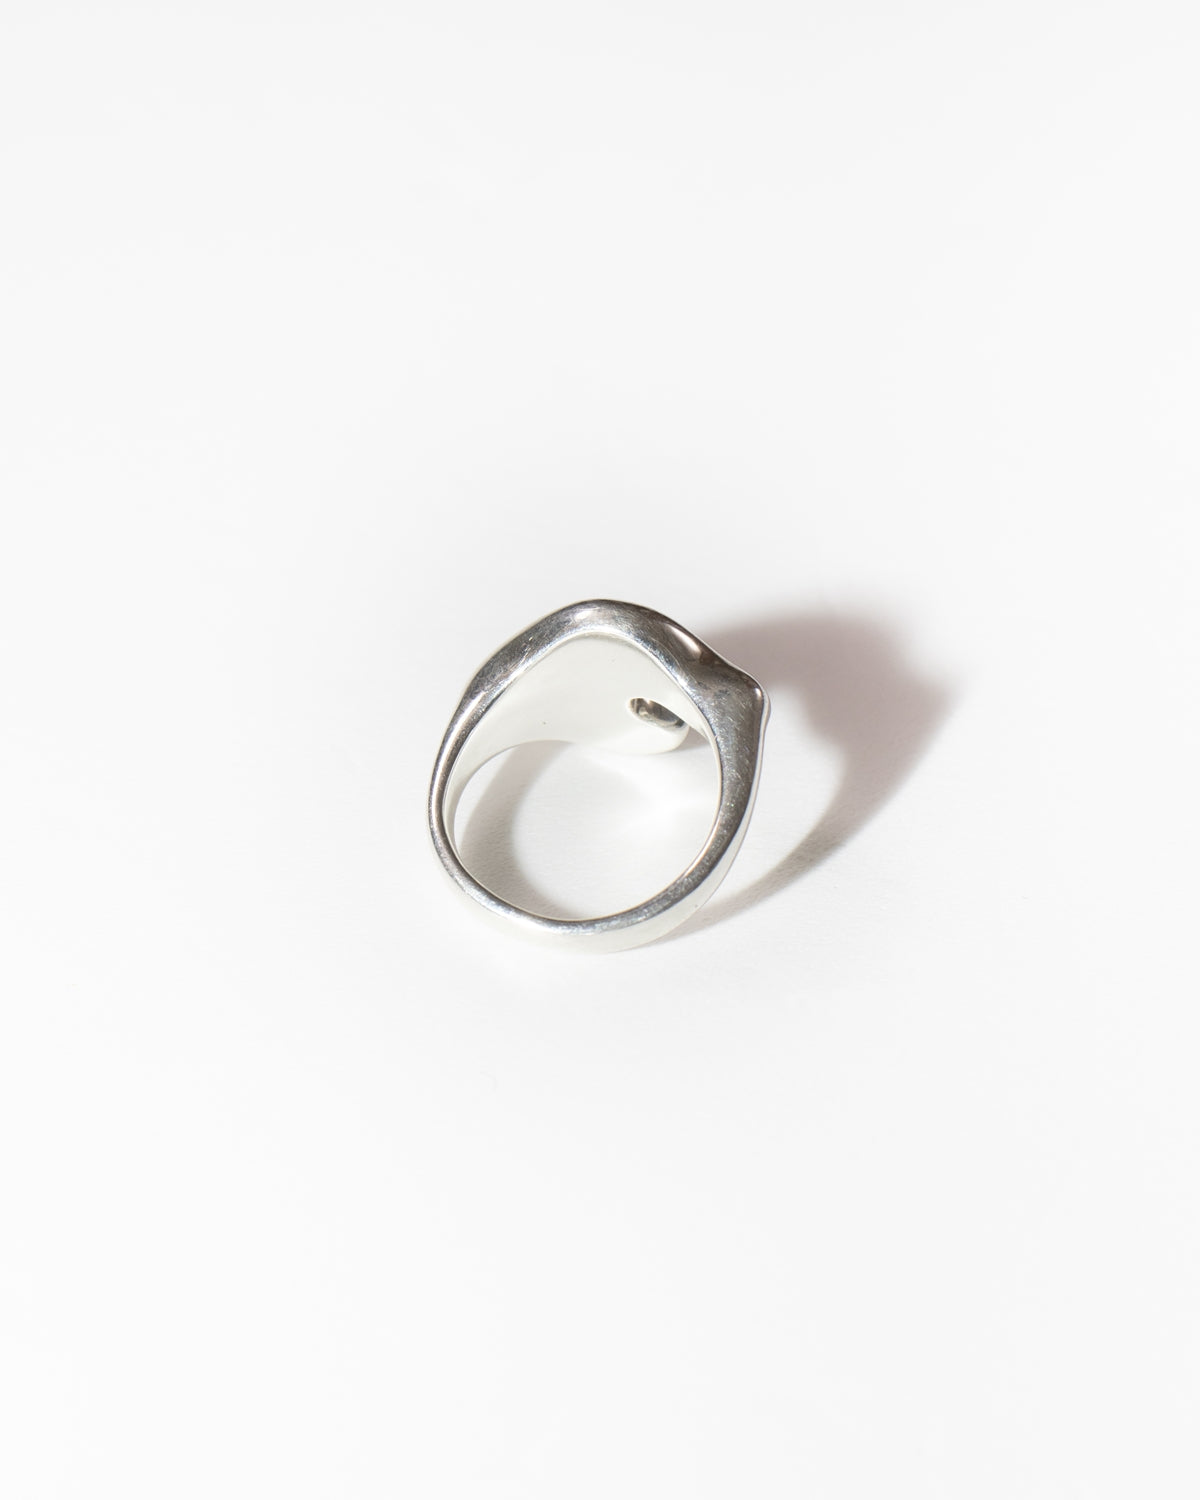 inoop claw ring silver925 リング